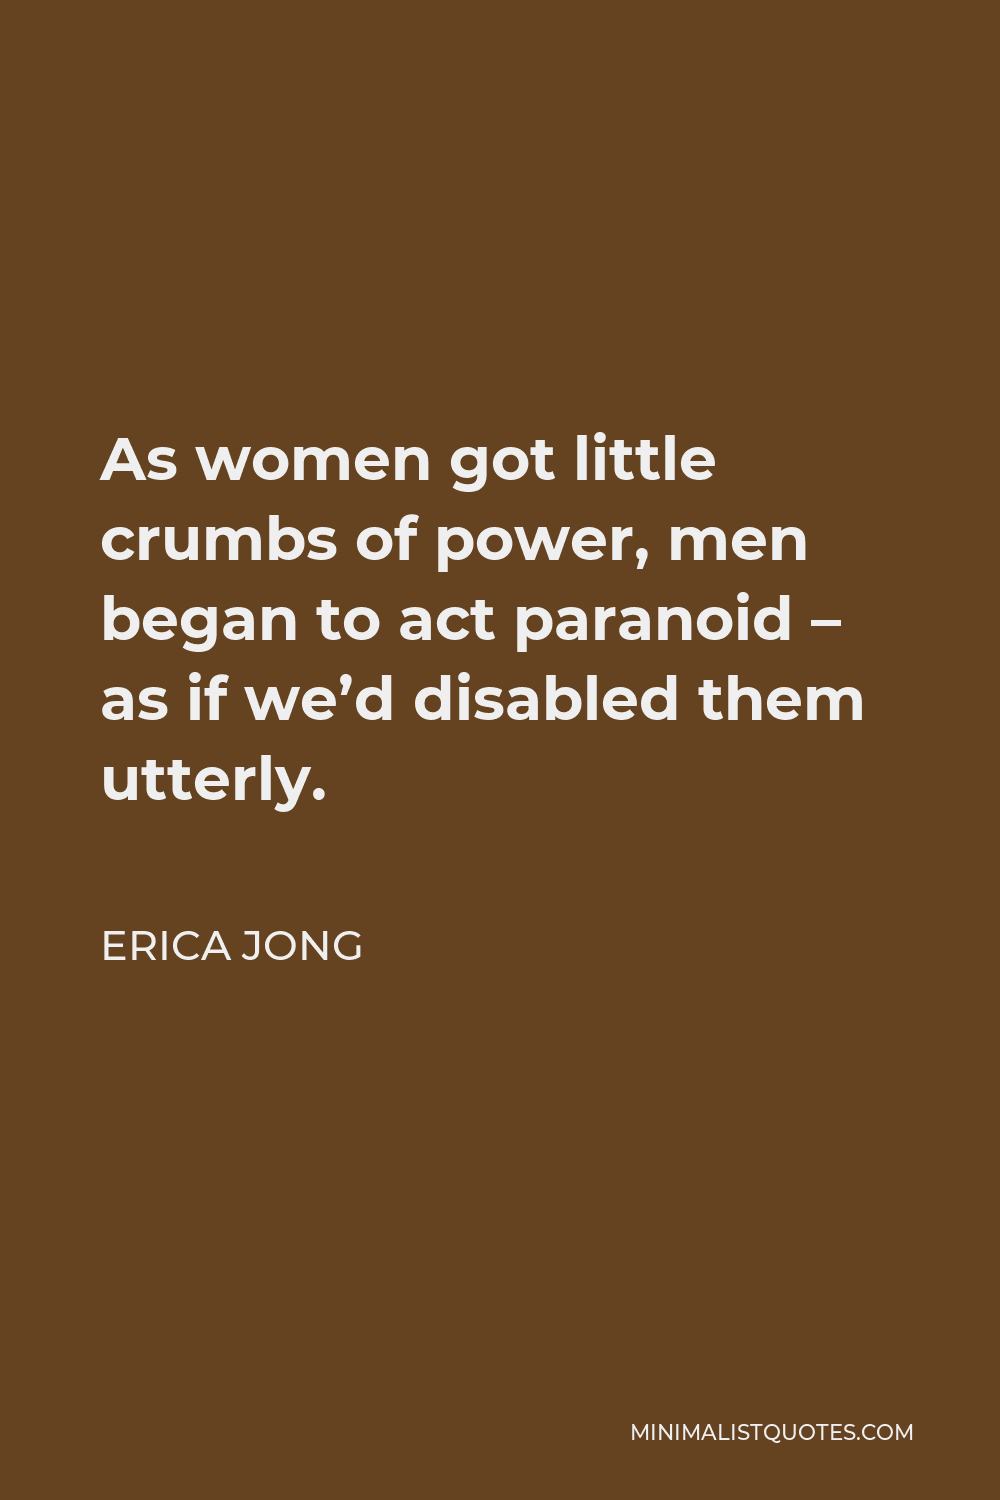 Erica Jong Quote - As women got little crumbs of power, men began to act paranoid – as if we’d disabled them utterly.